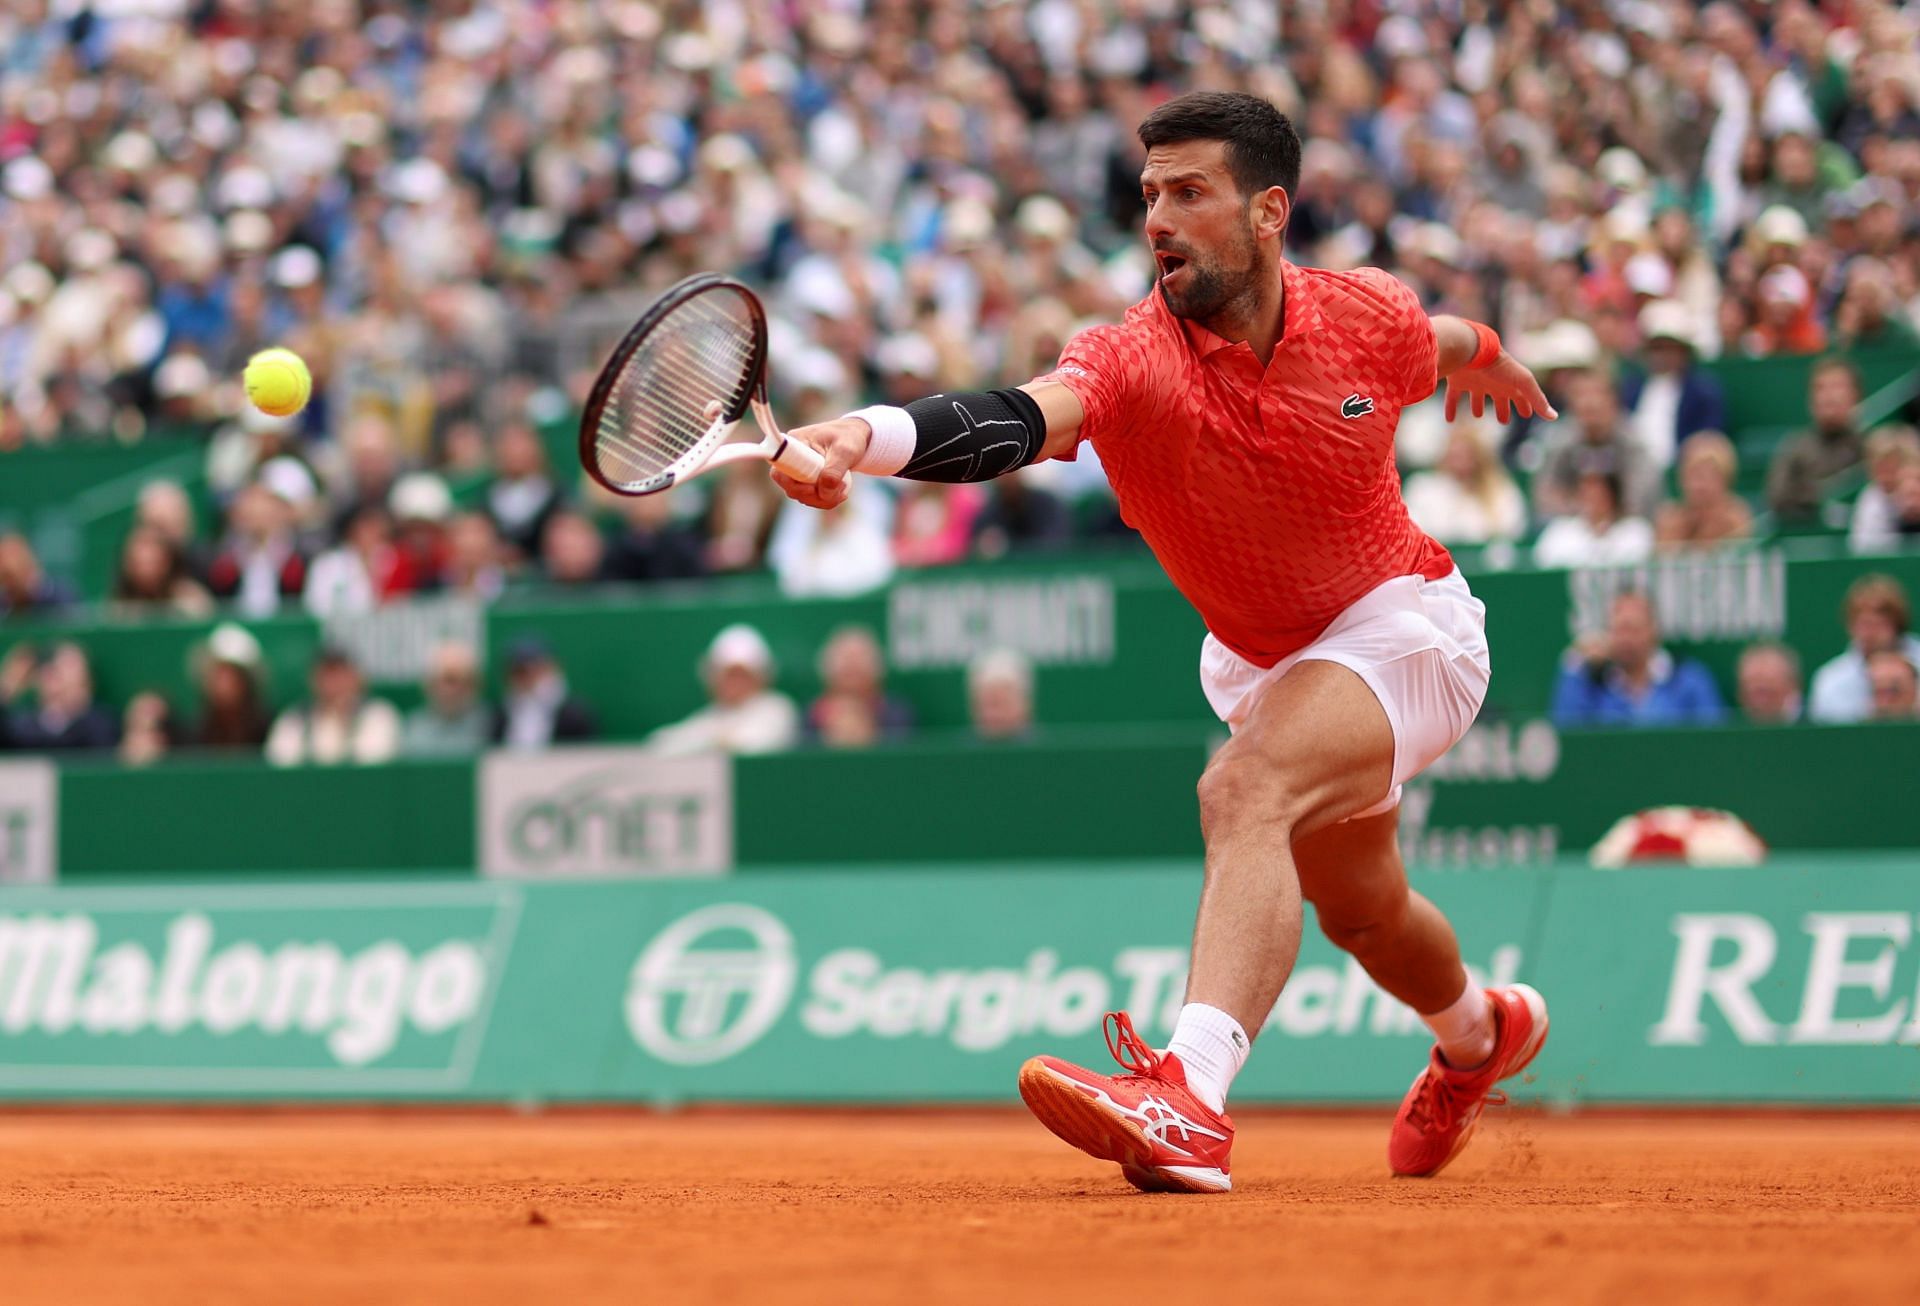 The World No. 1 made an early exit in Monte-Carlo